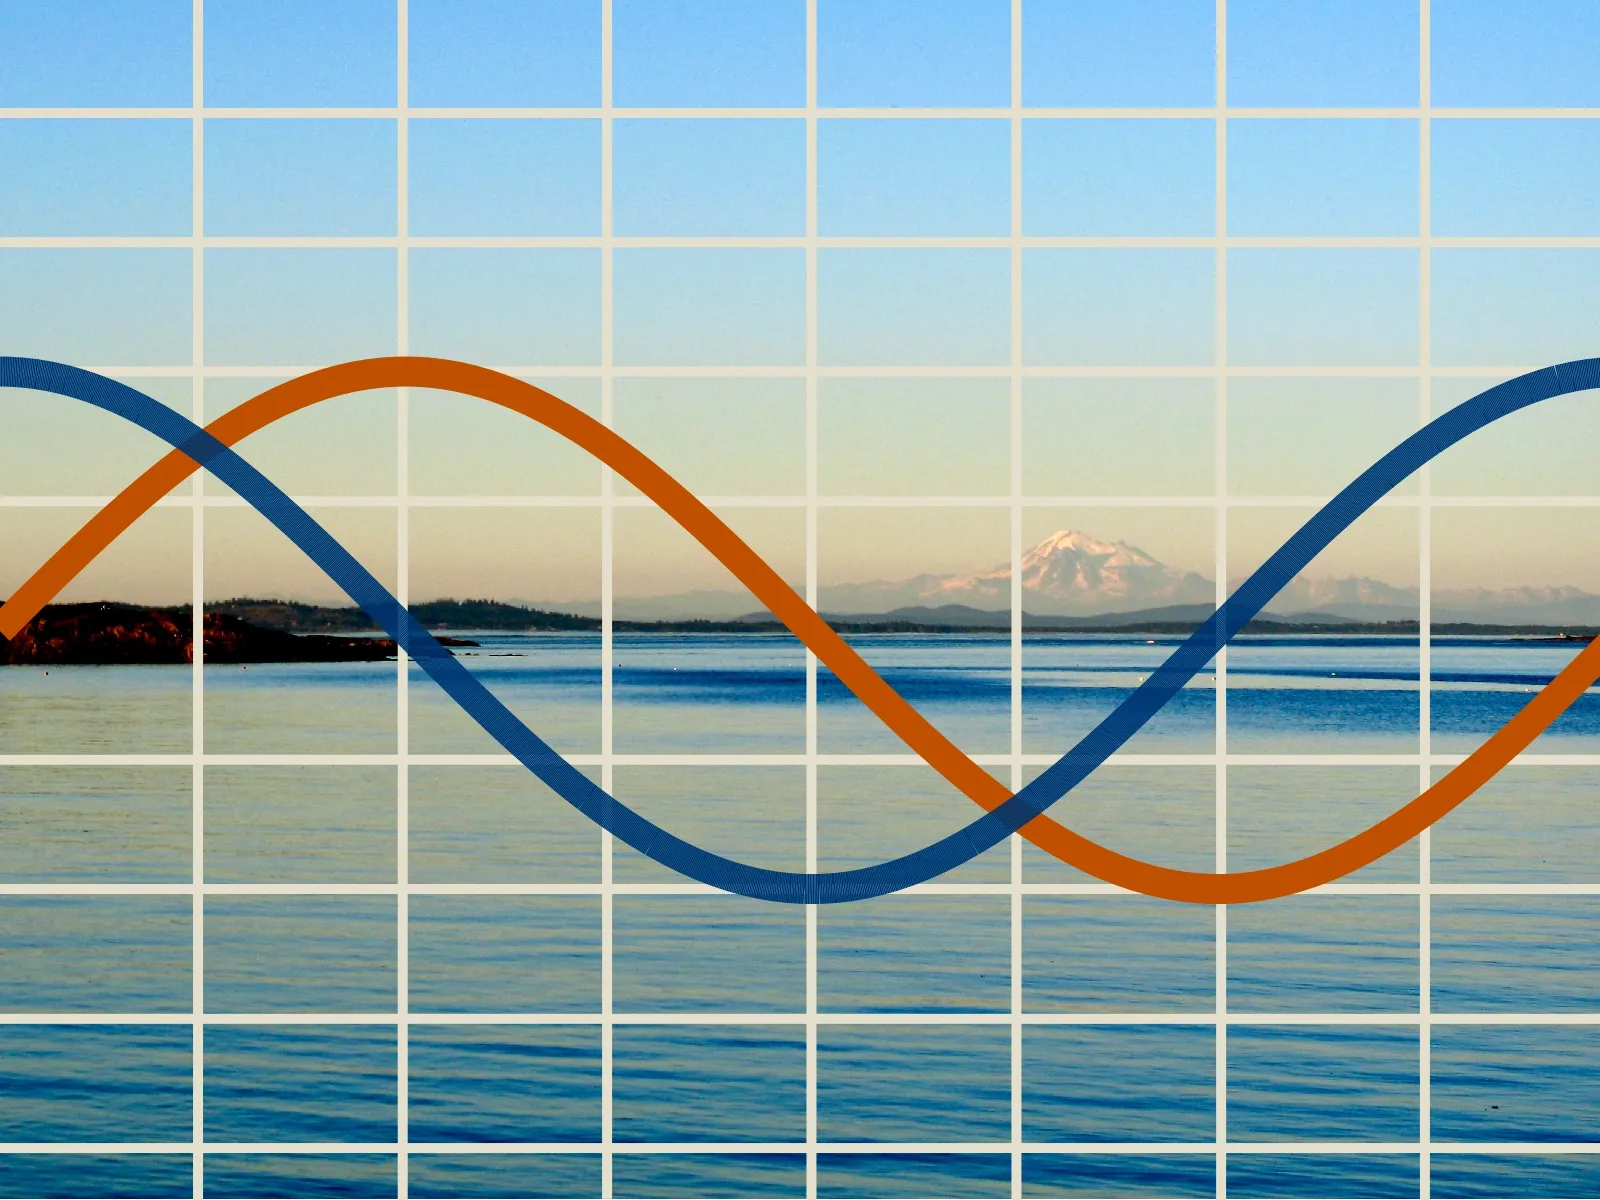 A colourful graph of sinusoidal functions overlaid on a photo of an ocean landscape at dusk with a mountain in the distance.